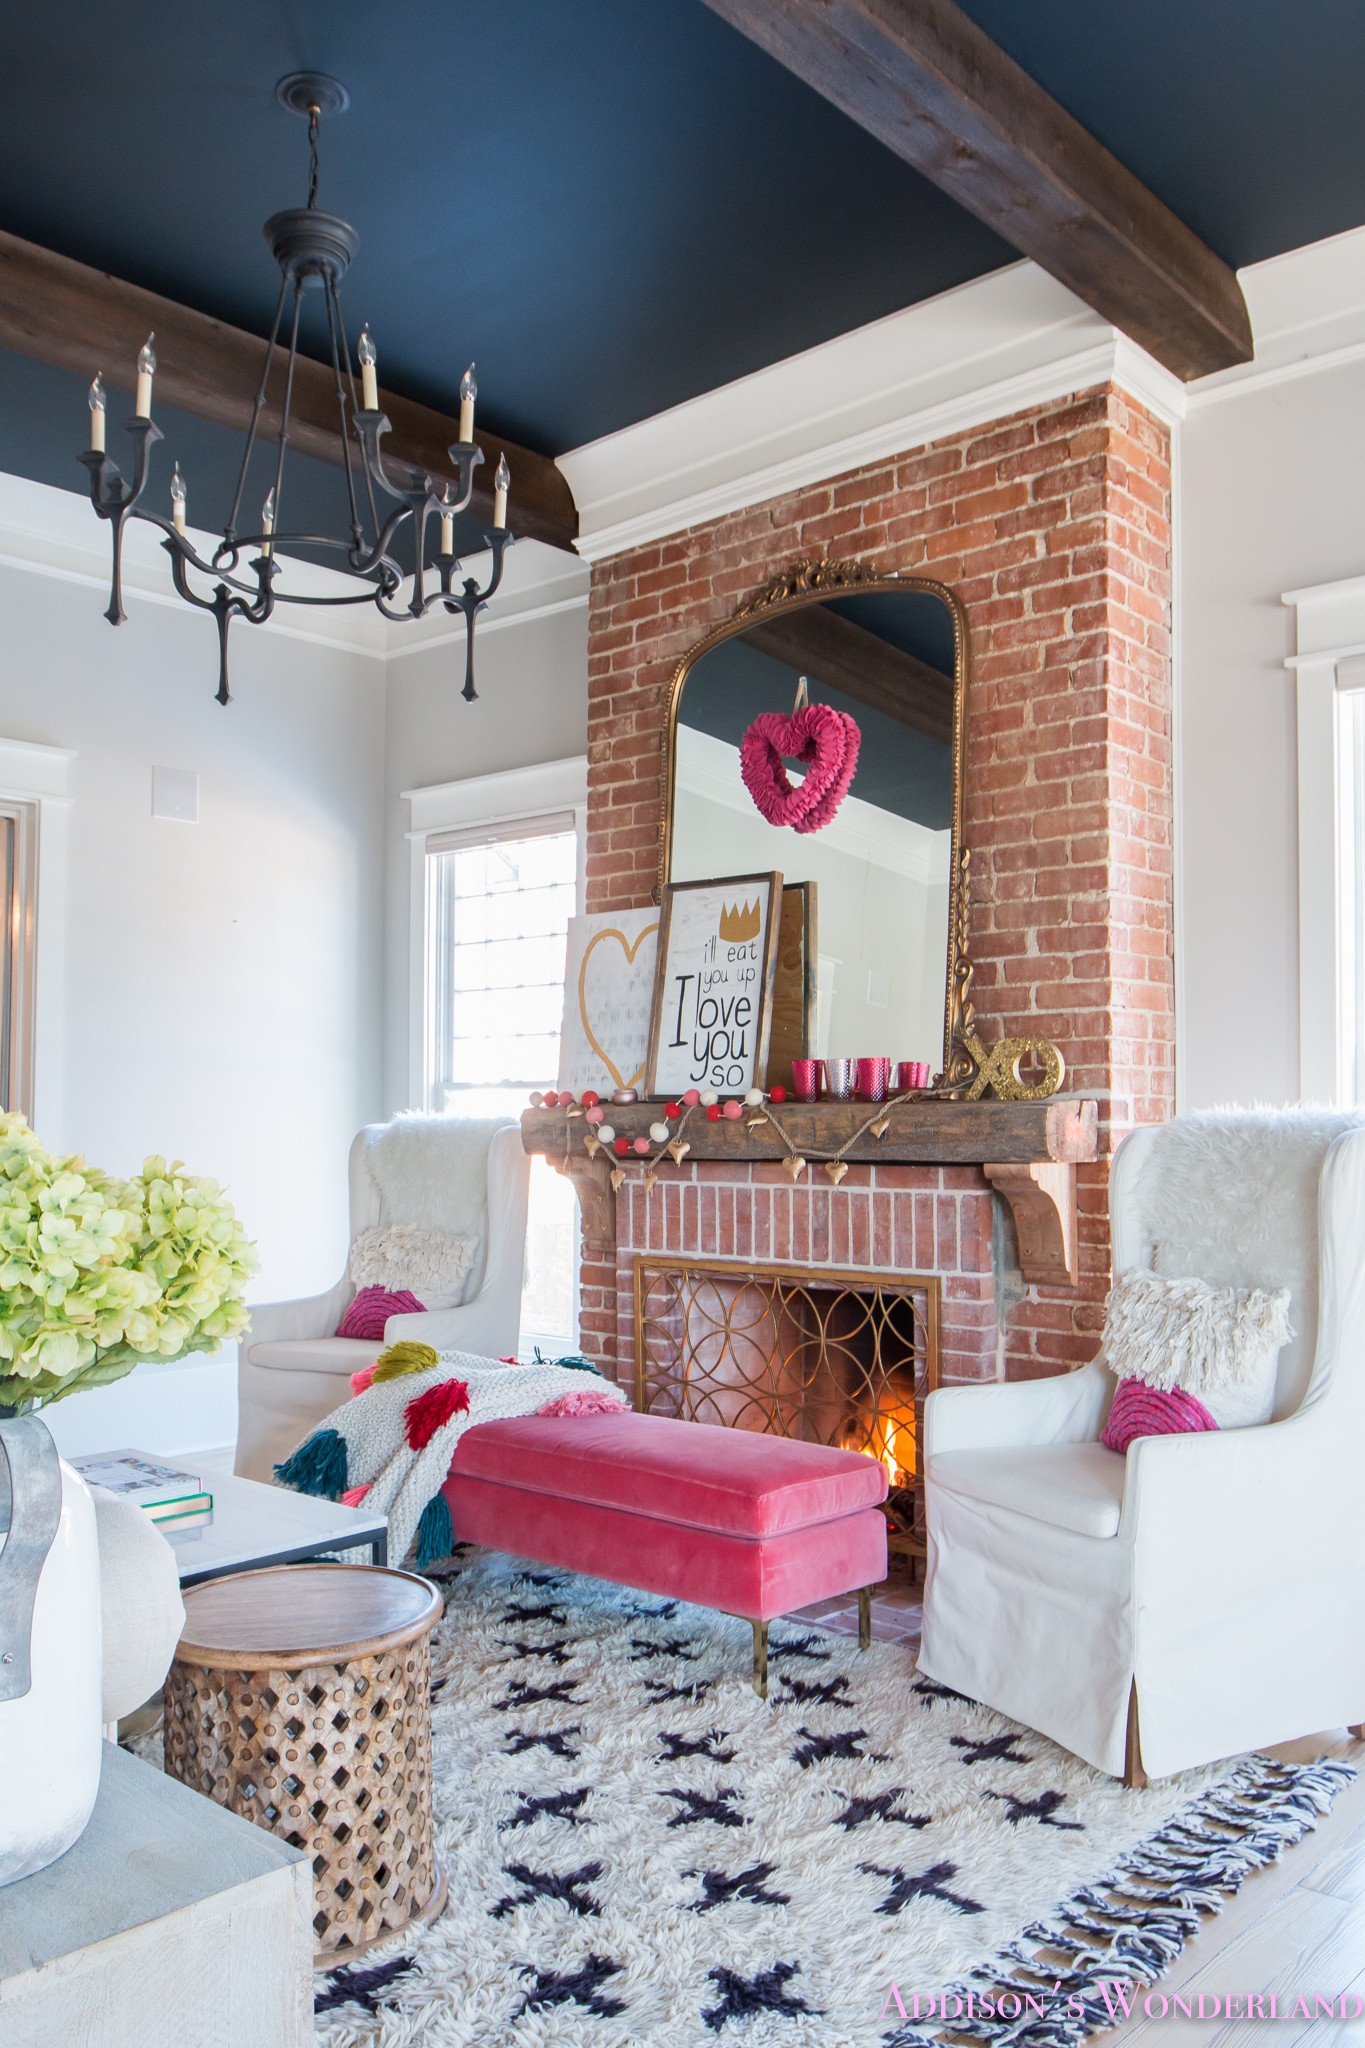 Ideas For Decorating Living Room
 Our Colorful Whimsical & Elegant Valentine s Day Living